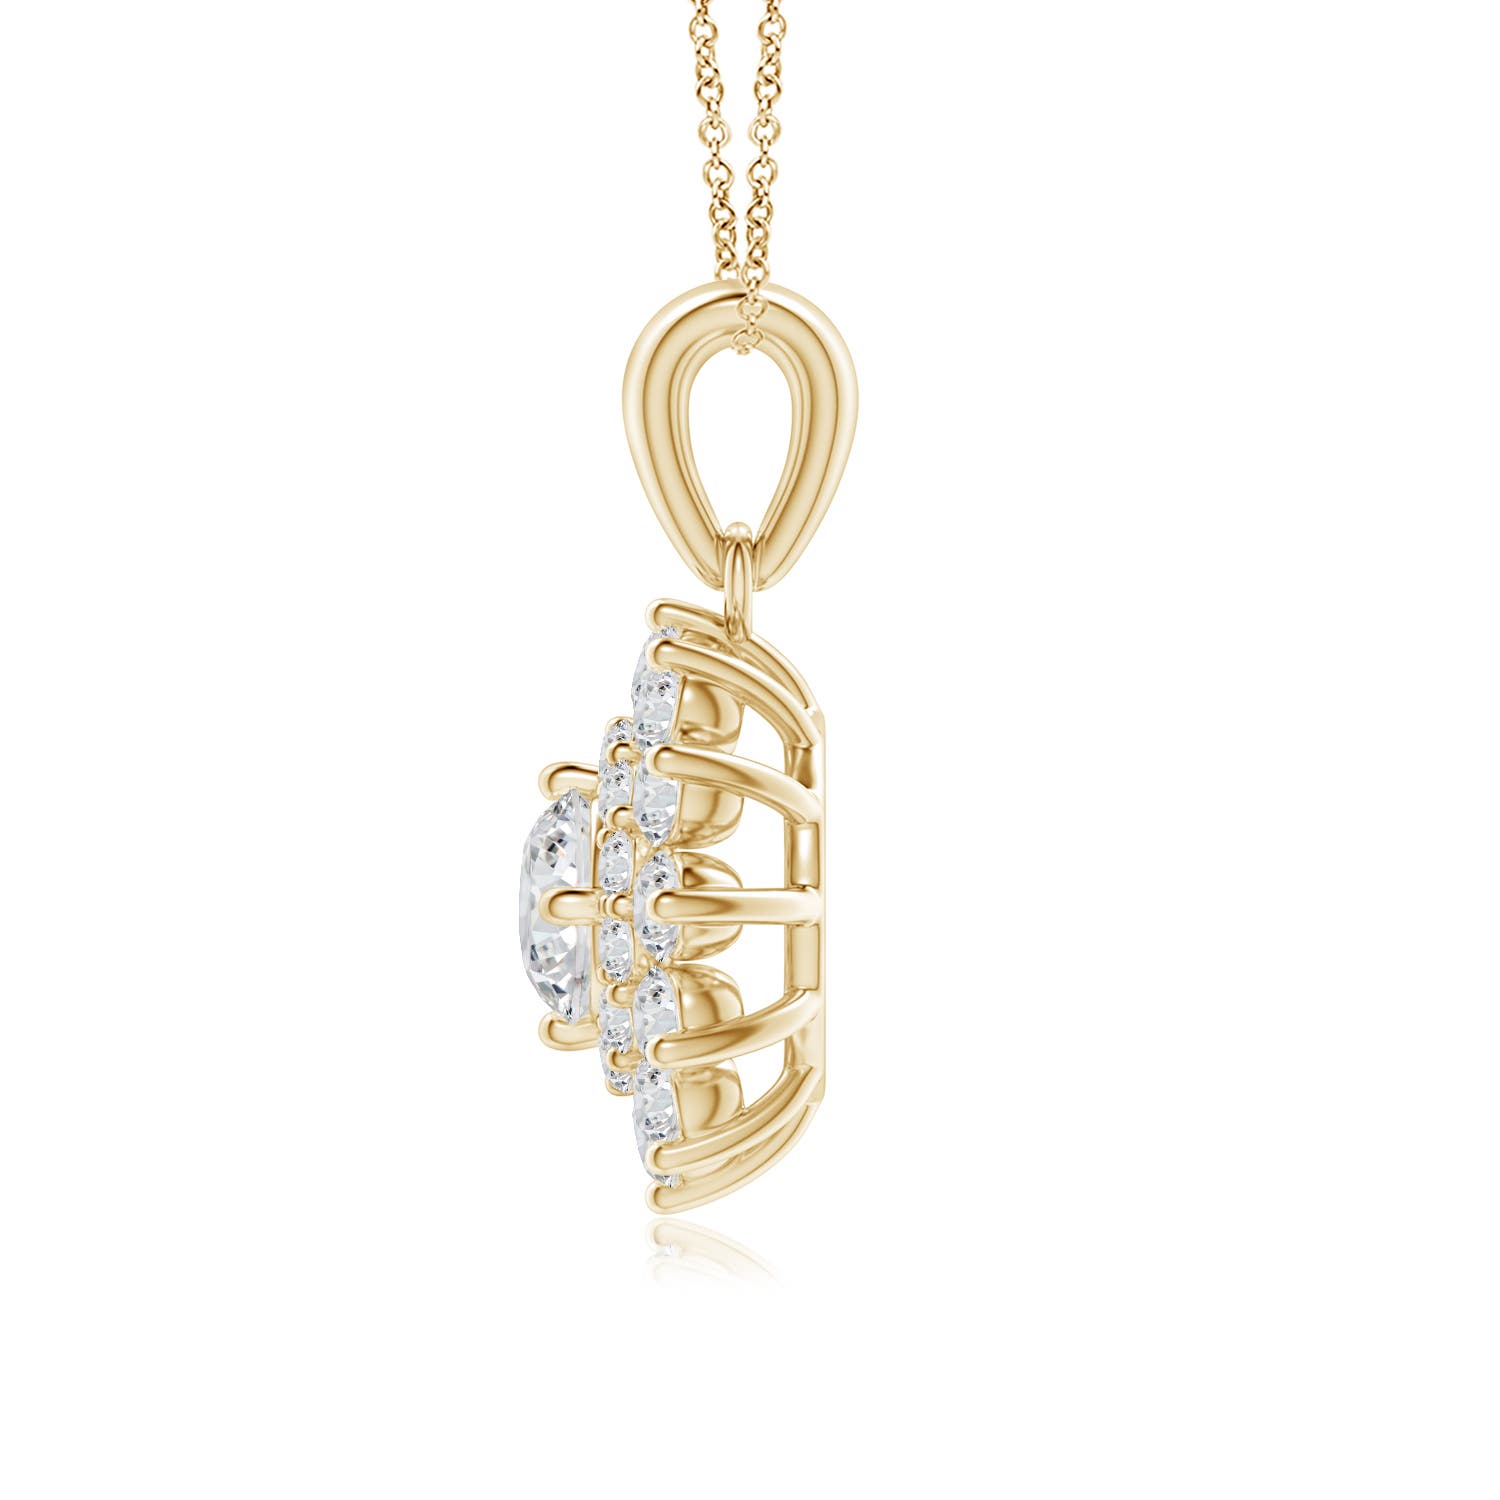 H, SI2 / 1.52 CT / 14 KT Yellow Gold